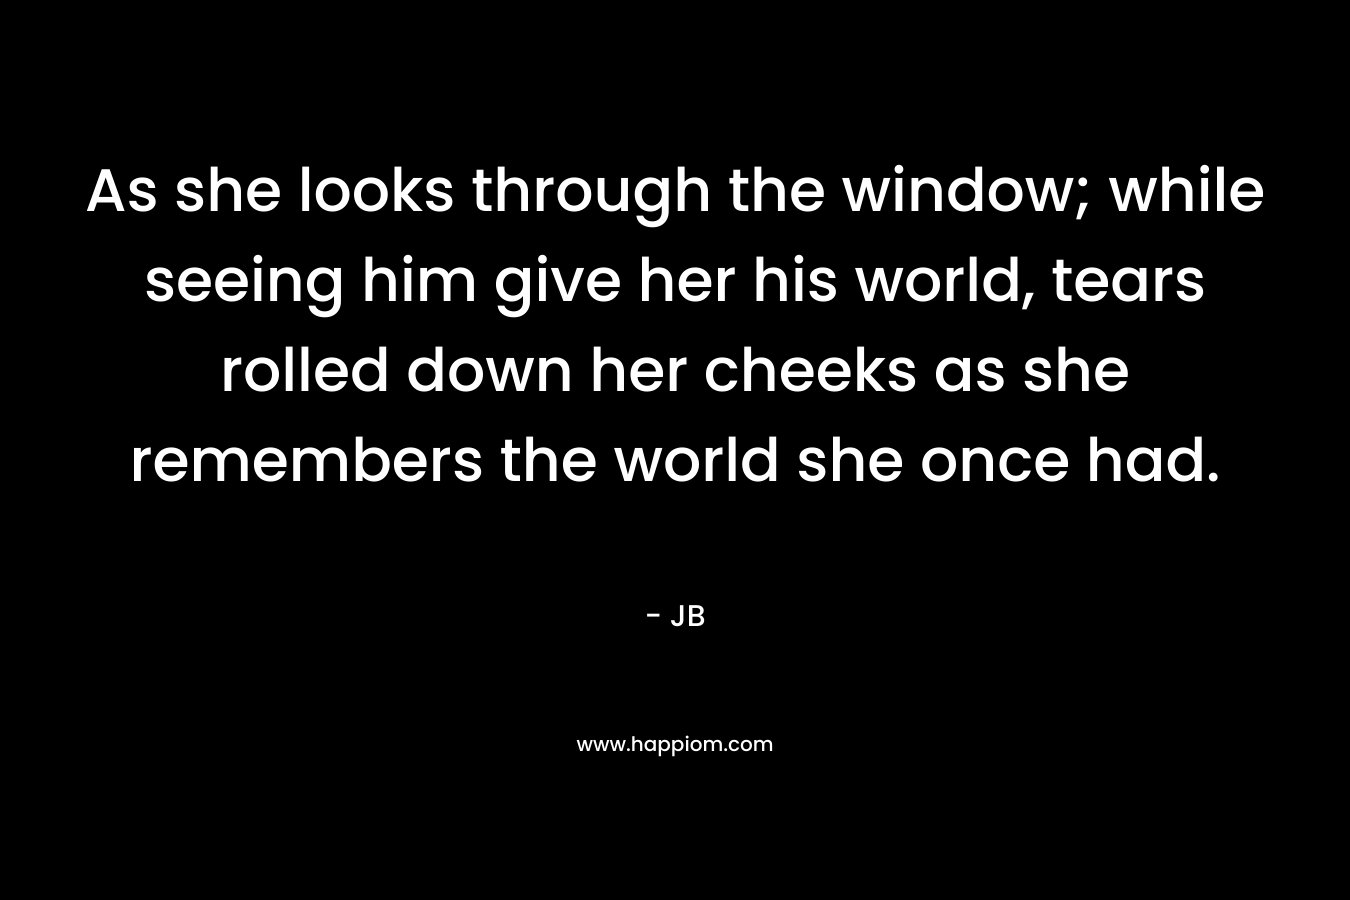 As she looks through the window; while seeing him give her his world, tears rolled down her cheeks as she remembers the world she once had.